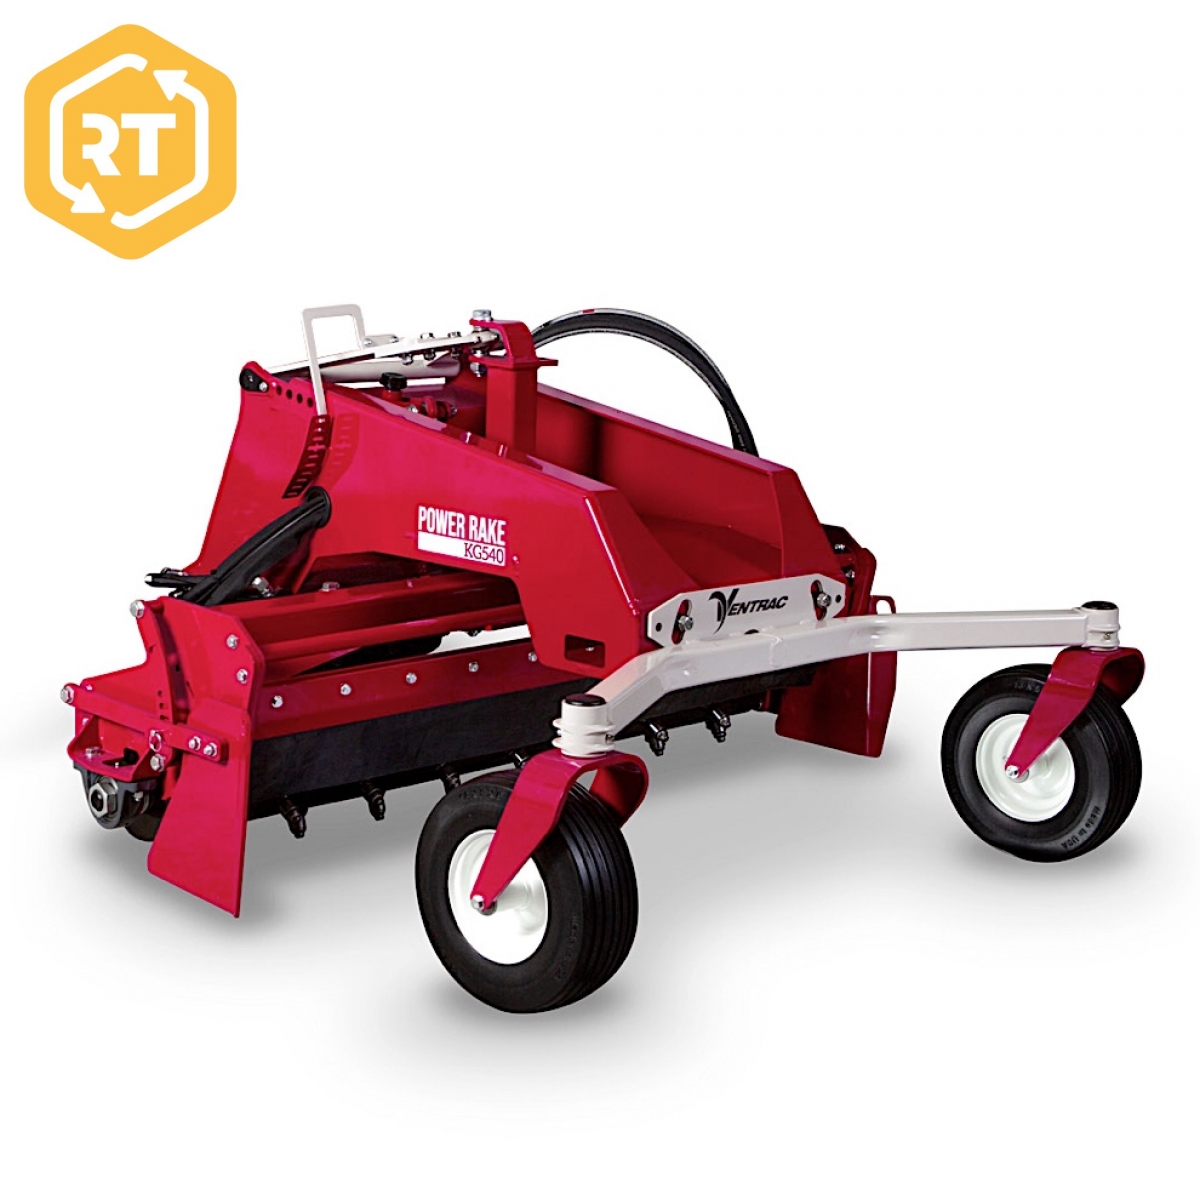 Ventrac KG540 Power Rake | Available for Hire!